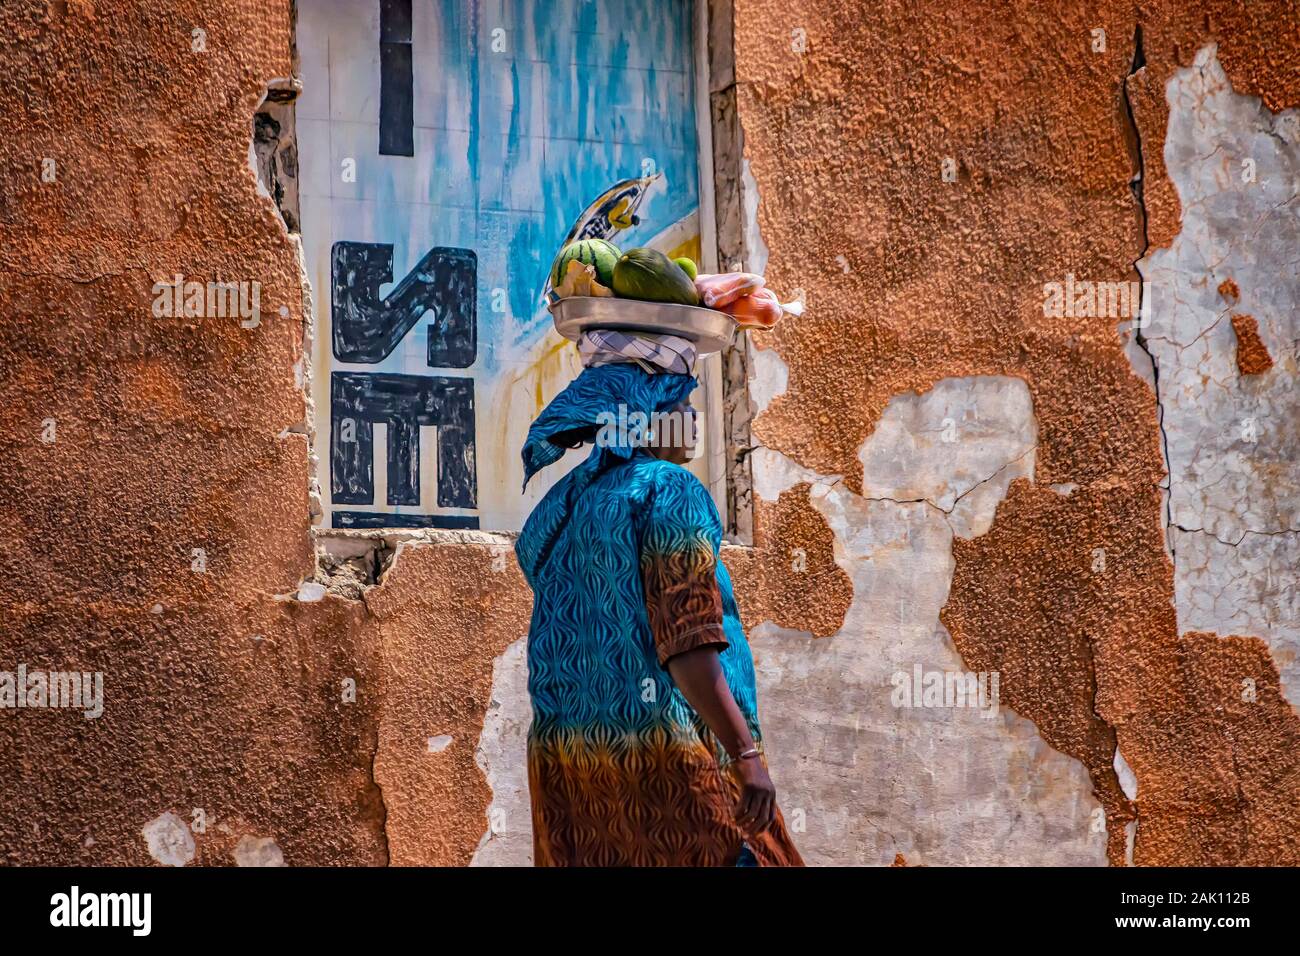 Saloum, Senegal, APRIL 26, 2019: Unidentifed Senegal woman carrying a watermelon and other fruits on her head in the city of Saloum and wearing the Stock Photo